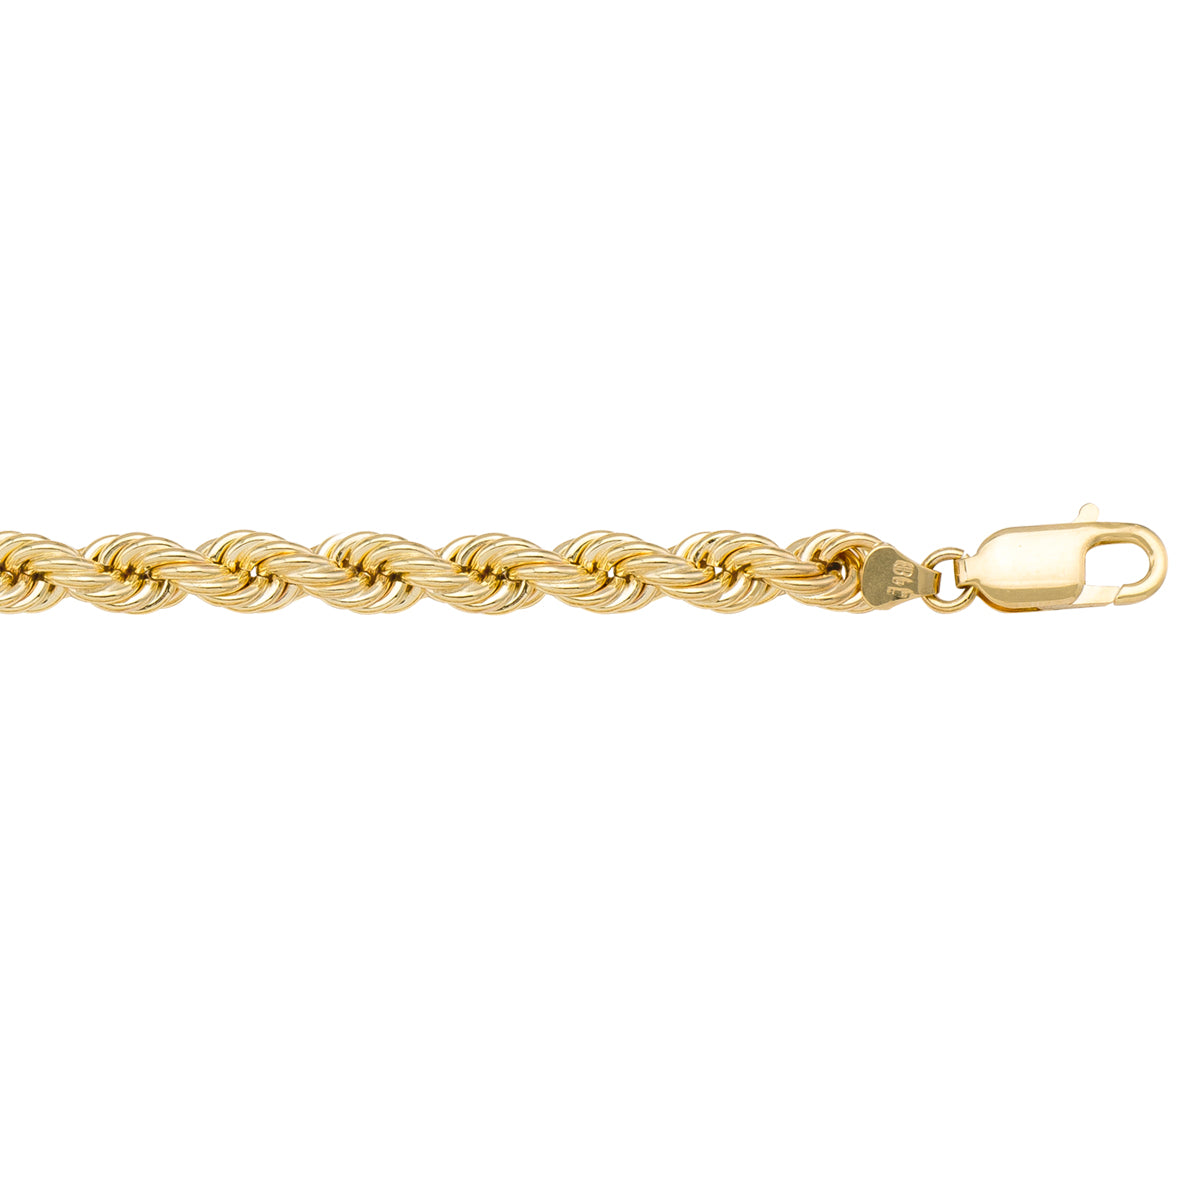 BRACELETS YELLOW GOLD HOLLOW ROPE LINK CHAIN